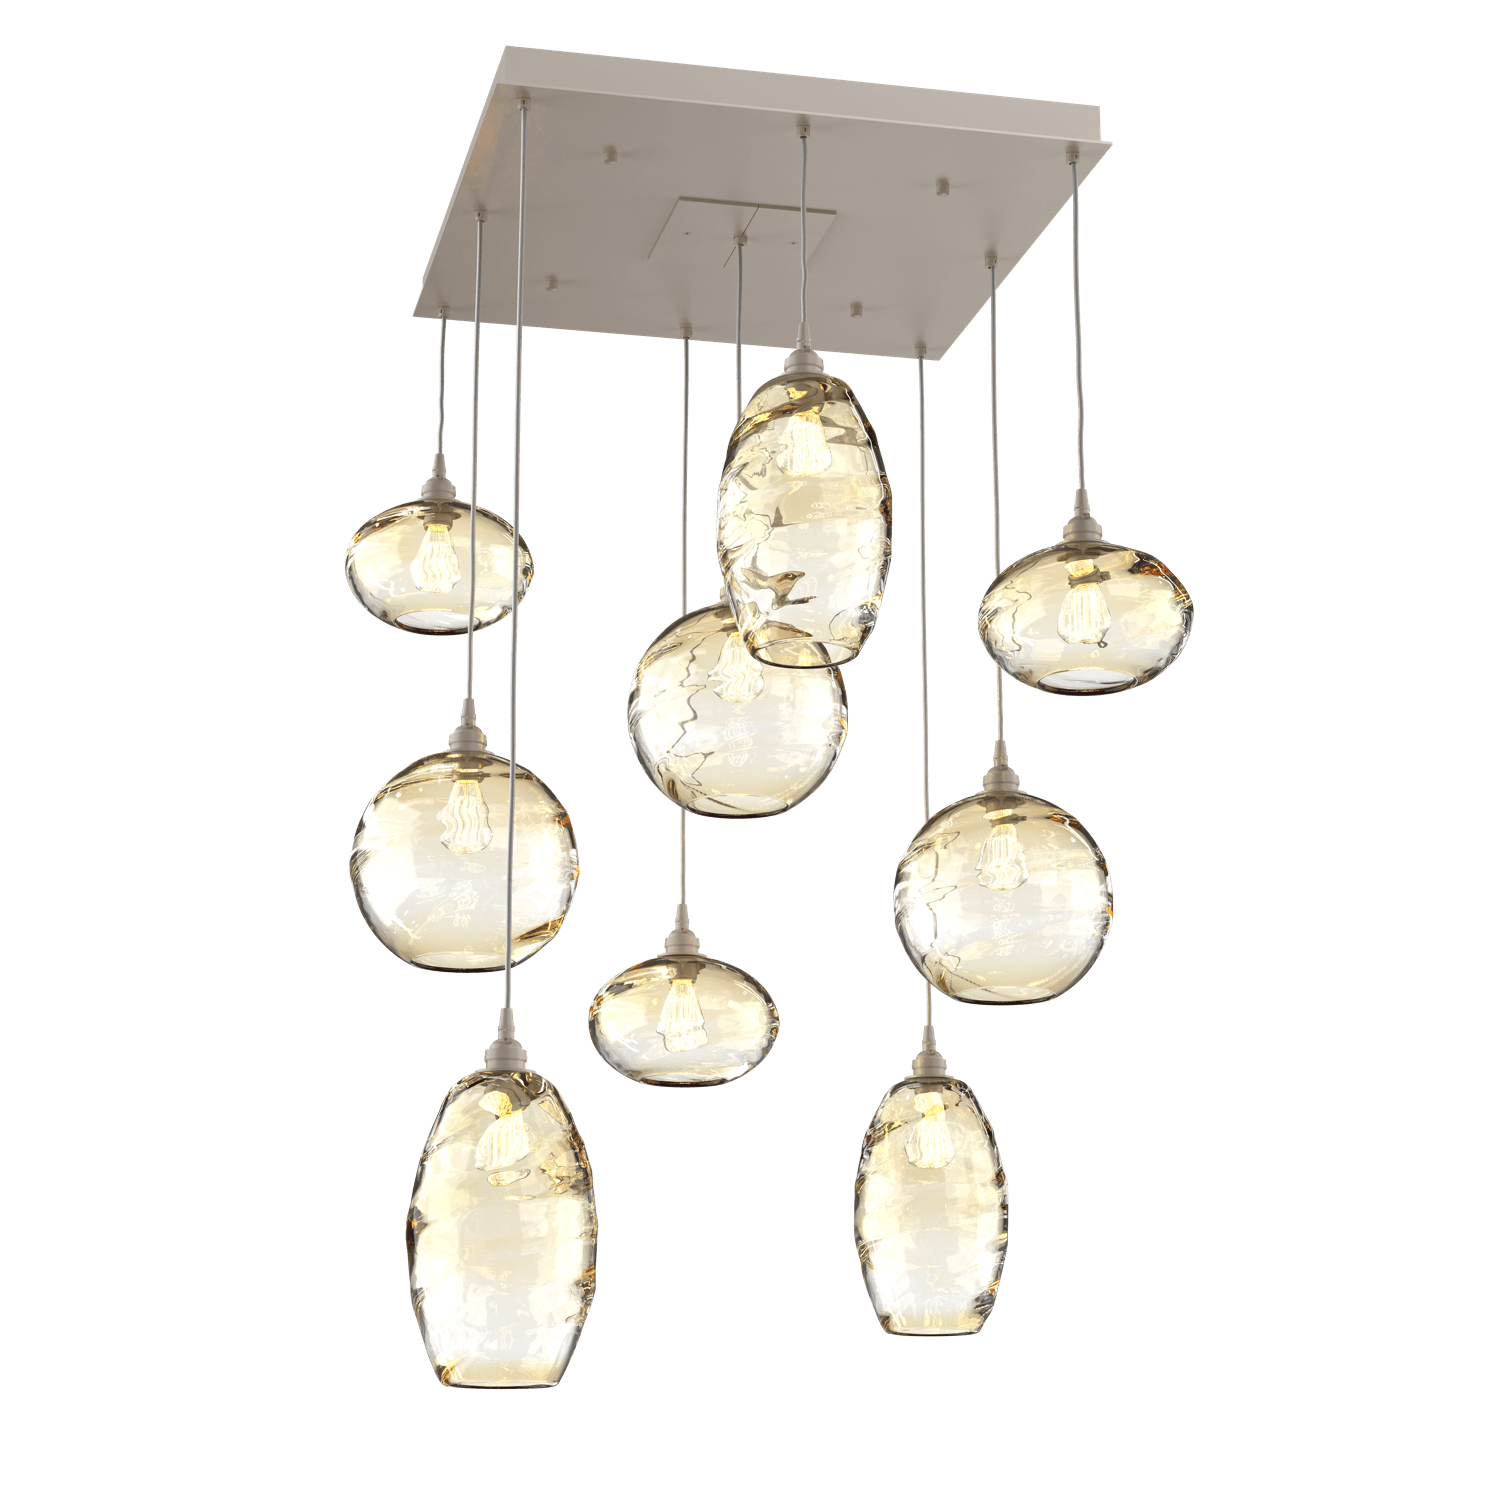 CHB0048-09-BS-OA-Hammerton-Studio-Optic-Blown-Glass-Misto-9-light-square-pendant-chandelier-with-metallic-beige-silver-finish-and-optic-amber-blown-glass-shades-and-incandescent-lamping